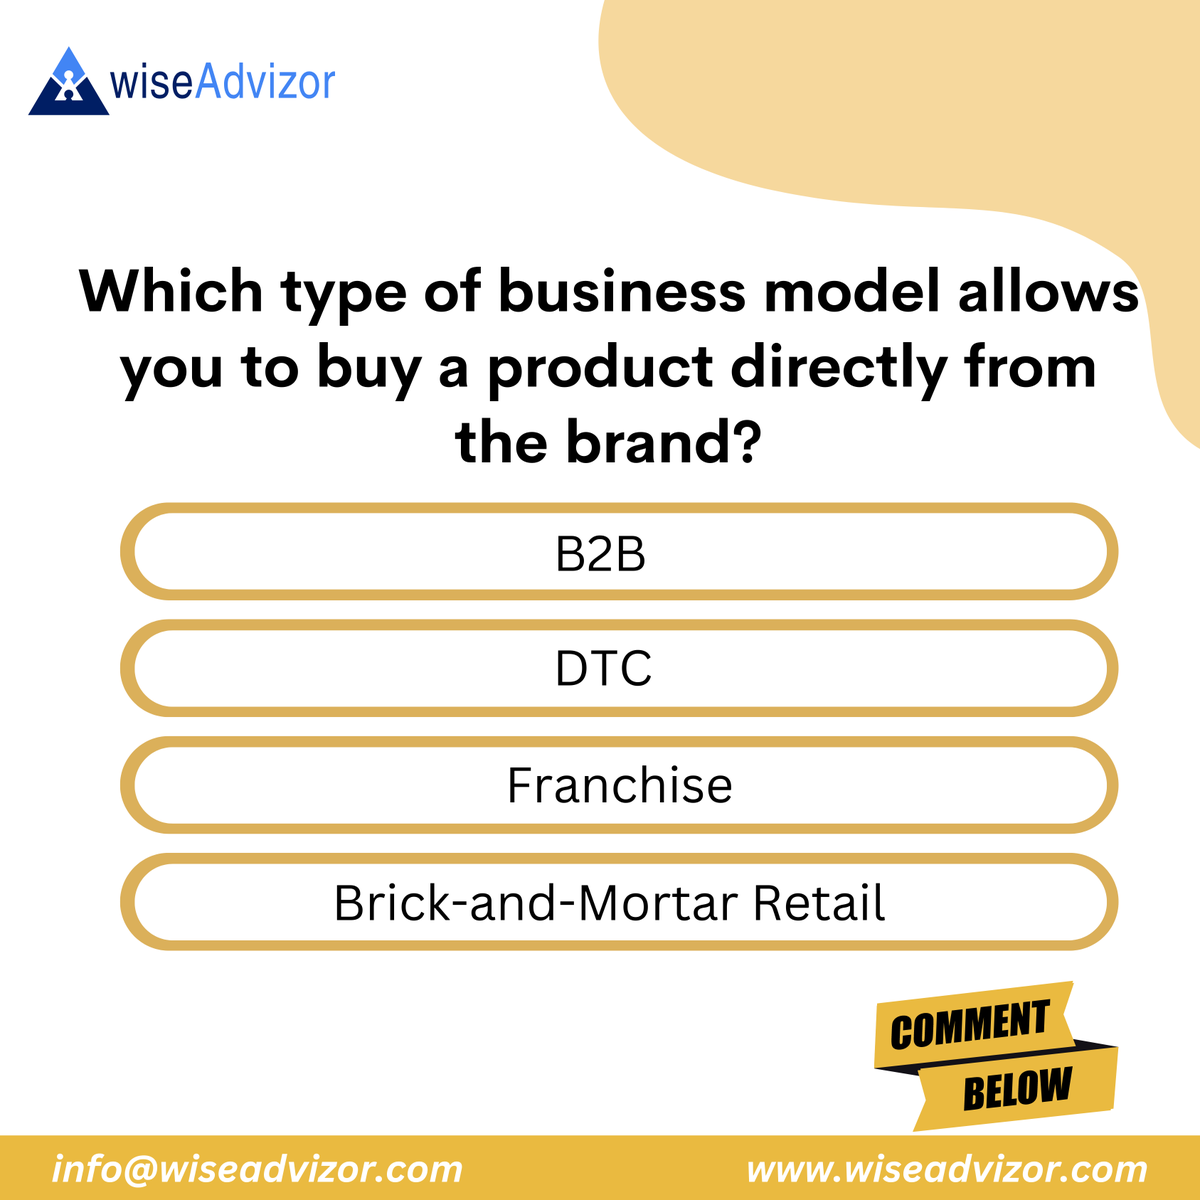 Write down your answer in the comment..

#businessmodel #startup #BusinessNews #Quizzes #quiz #startup #b2b #dtc #entrepreneur #startups #growth #marketing